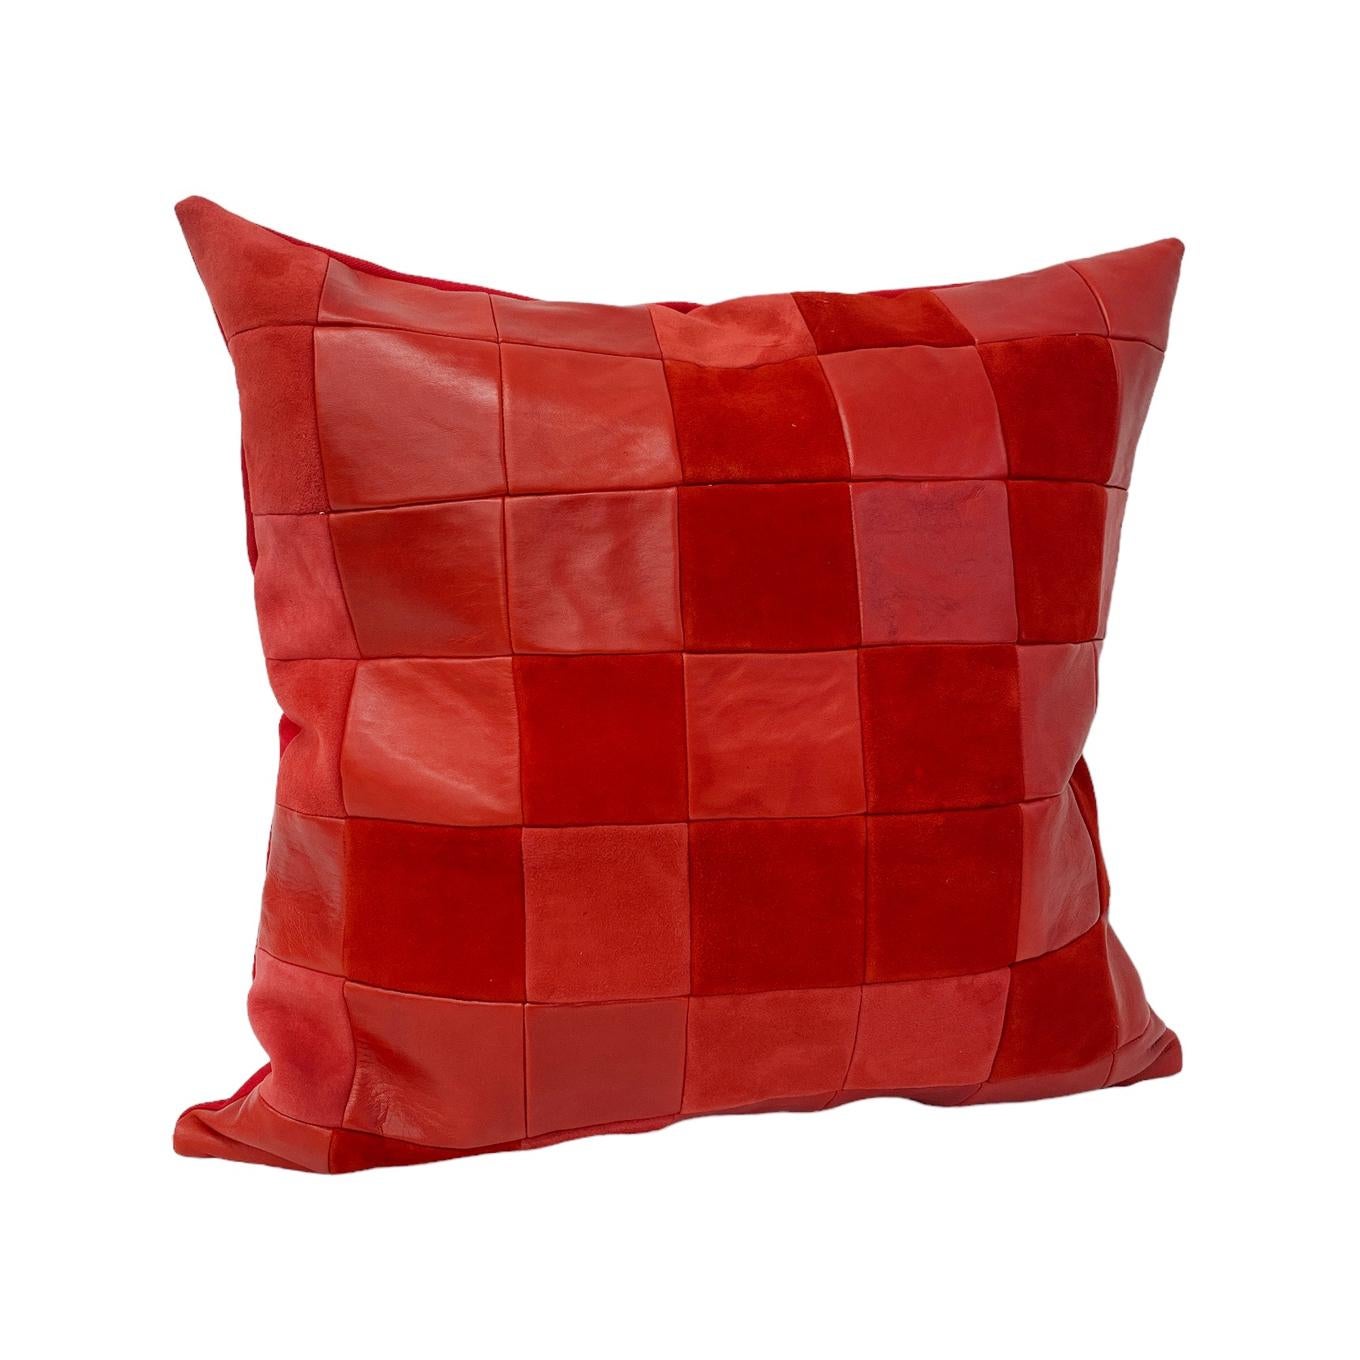 Red Leather Home Decorative  Throw Pillow
A graphic tessellation of deep-toned reds in buttery leather and softest suede.  Modern warmth and richness that gives as much pleasure to the eye as it does to the touch. 